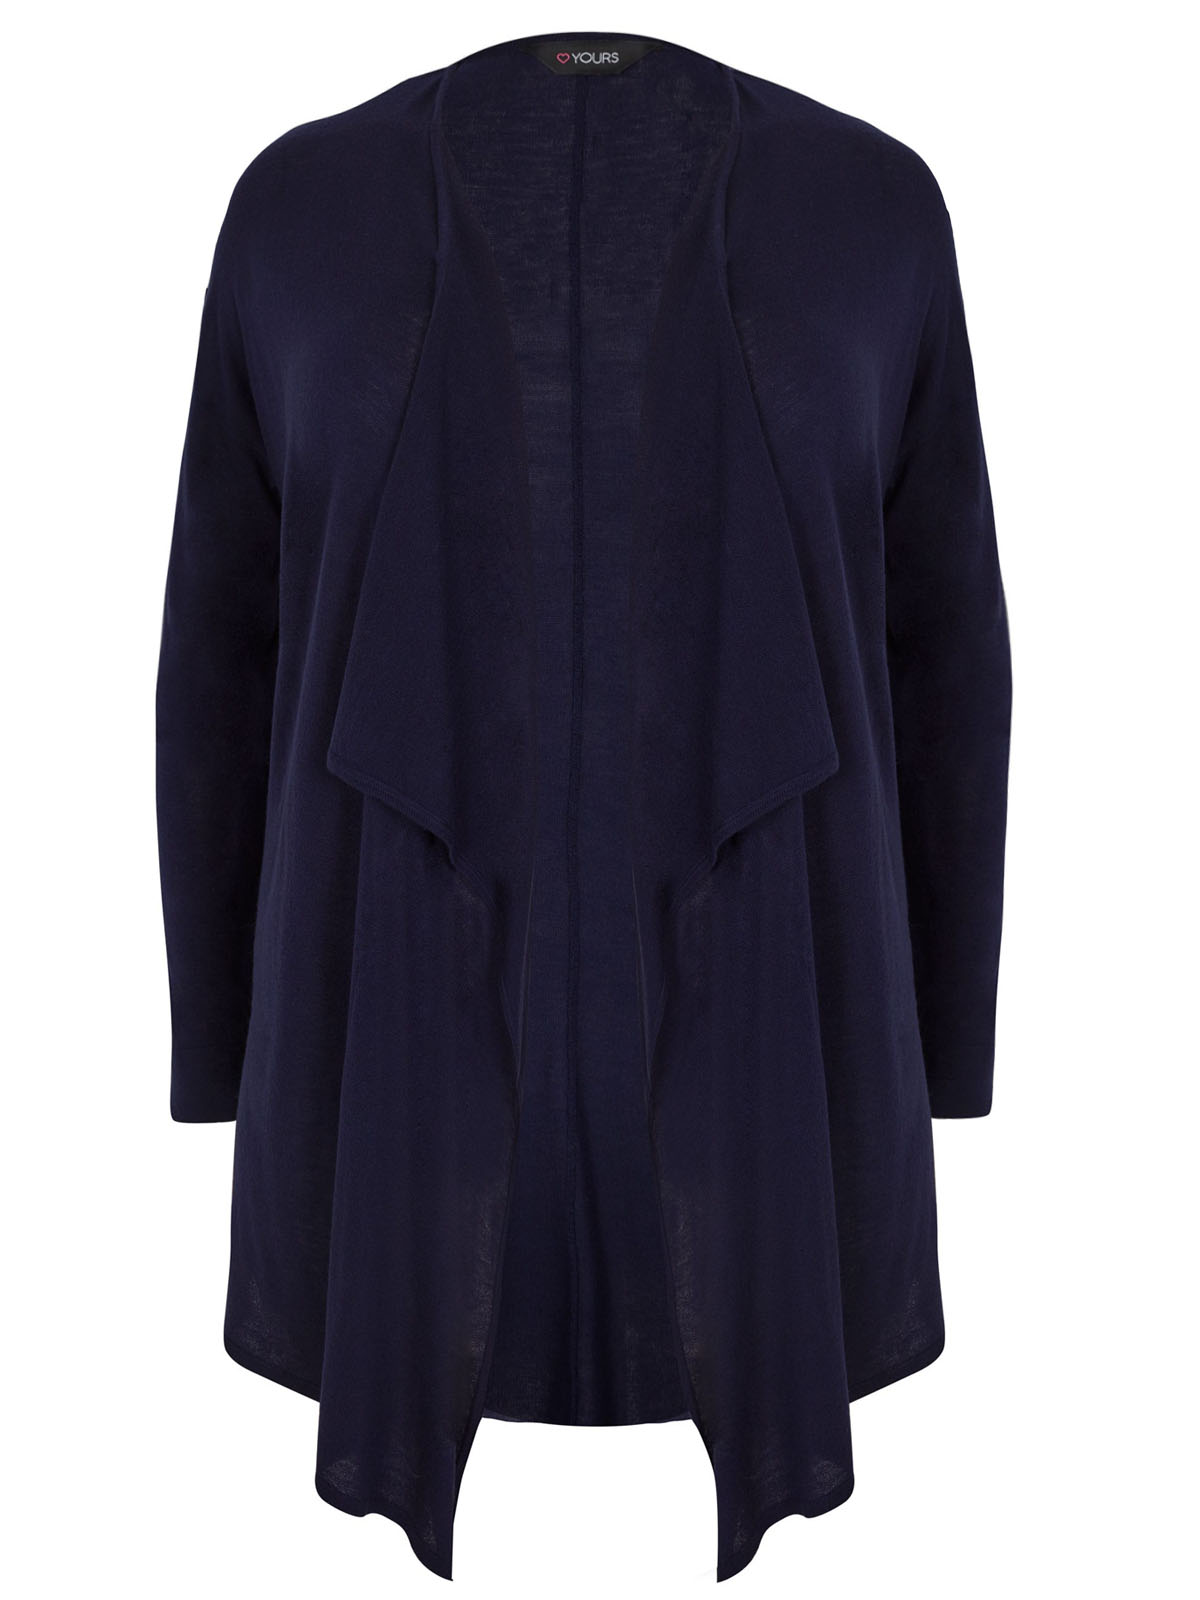 Y0URS - - Yours NAVY Longline Waterfall Cardigan - Plus Size 34/36